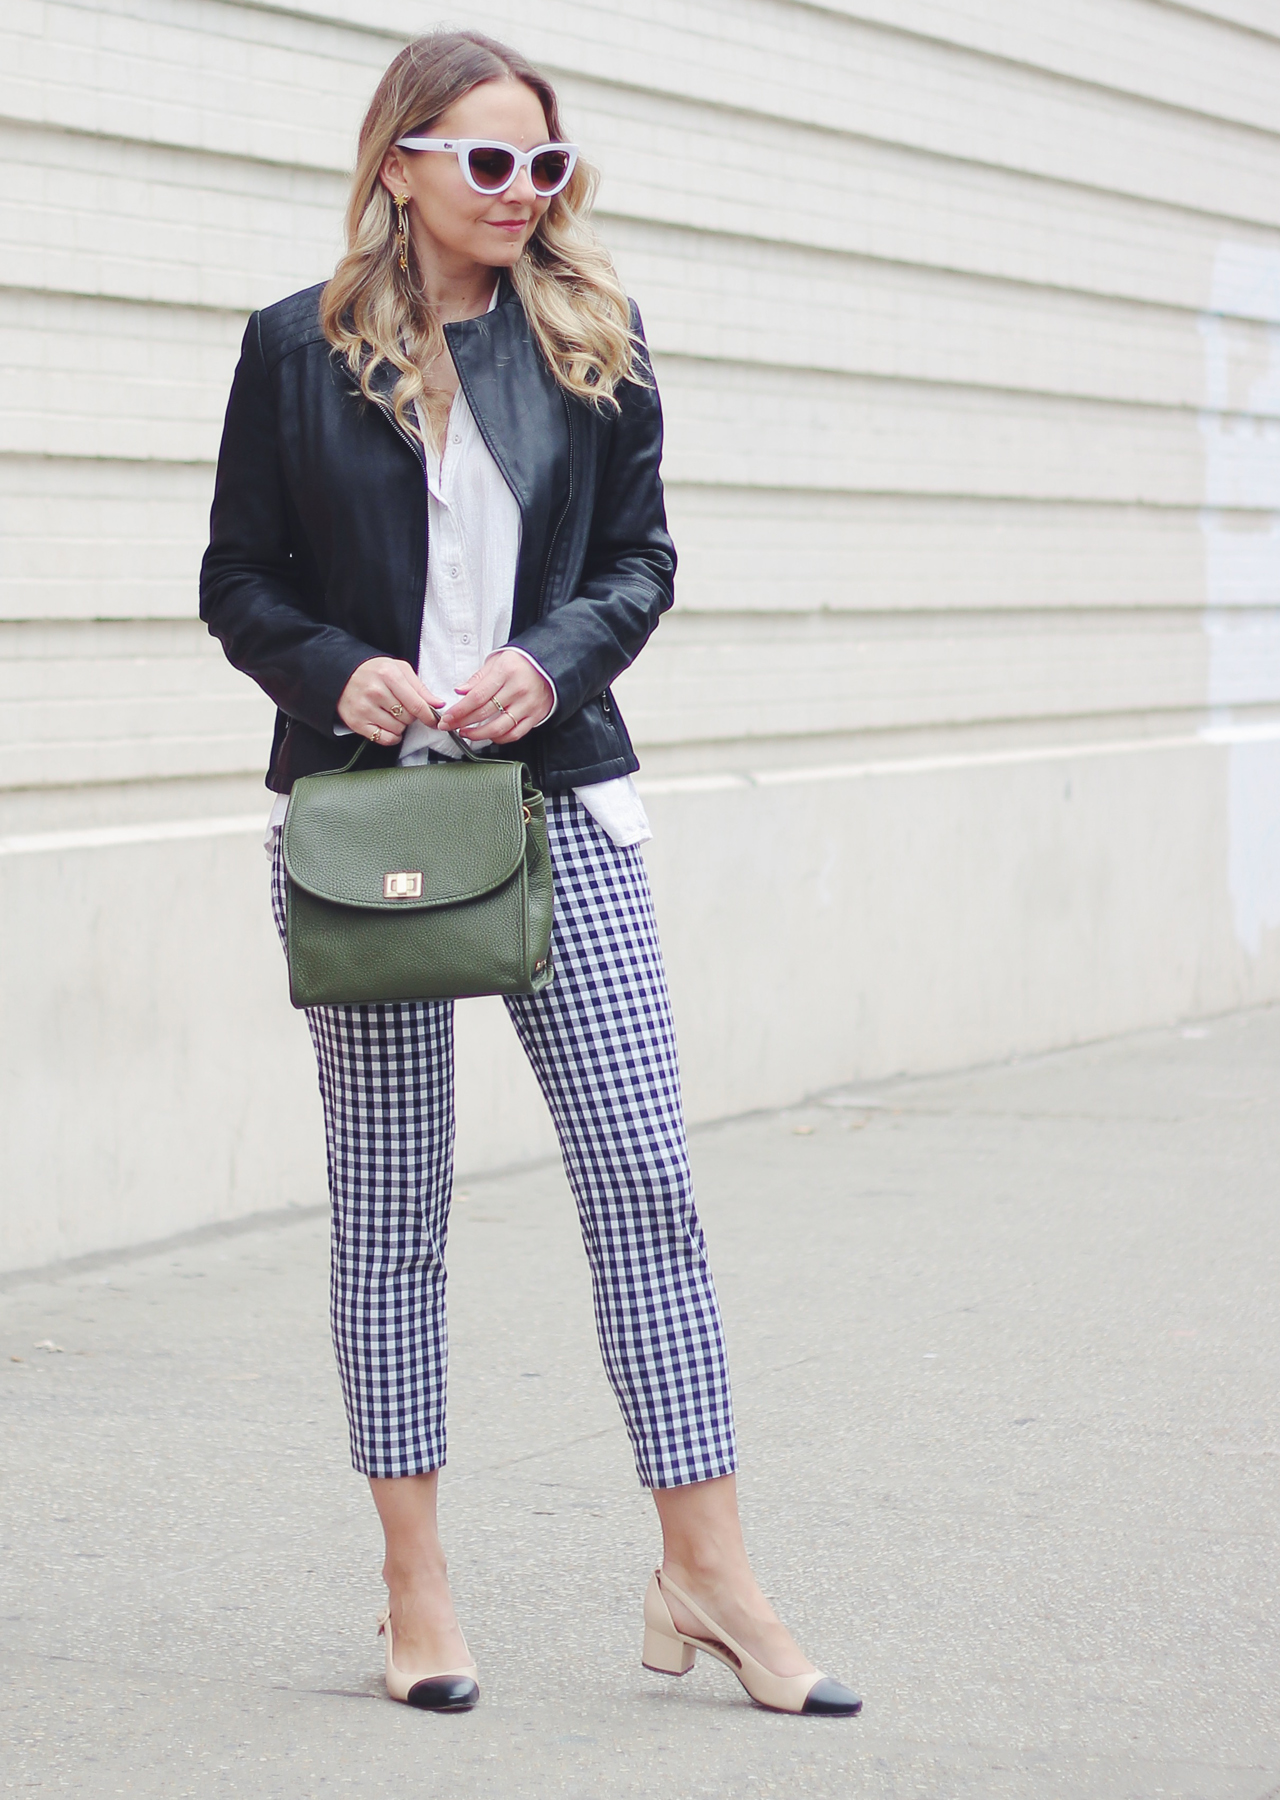 GINGHAM PANTS AND LEATHER MOTO JACKET – The Steele Maiden